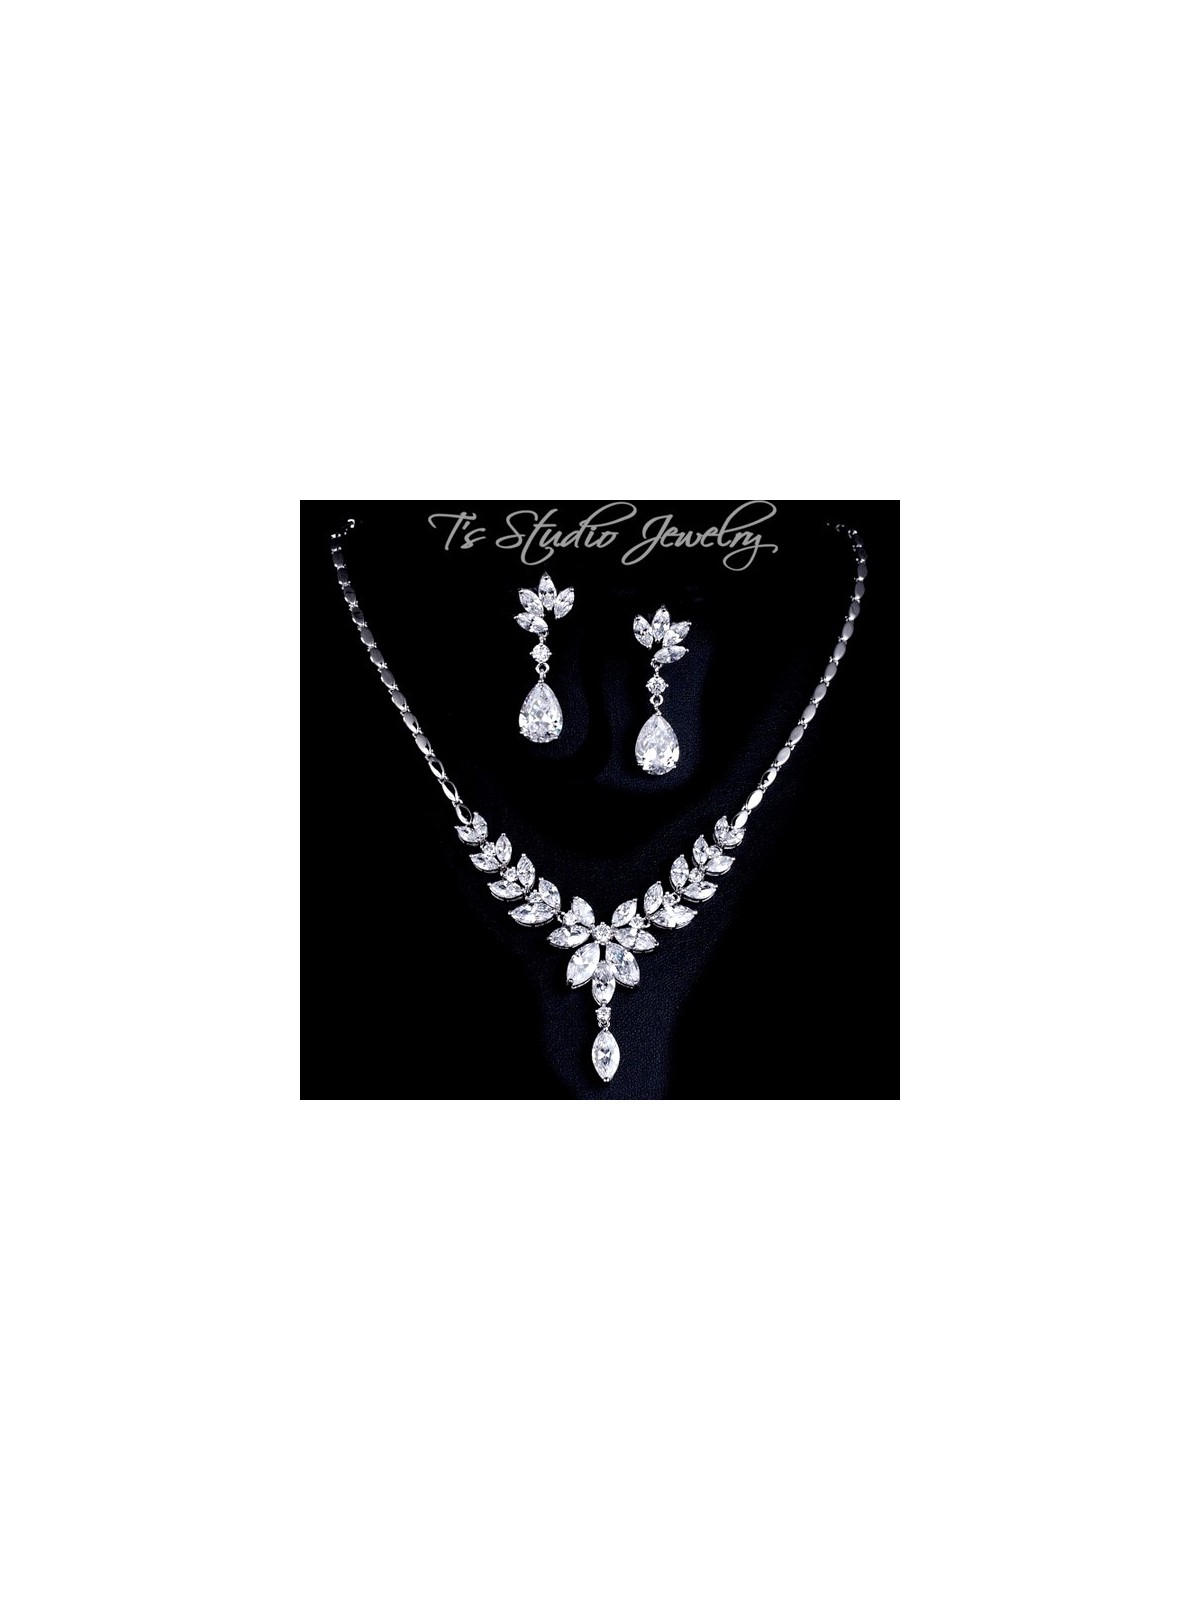 Marquise CZ Bridal Necklace Earrings Set